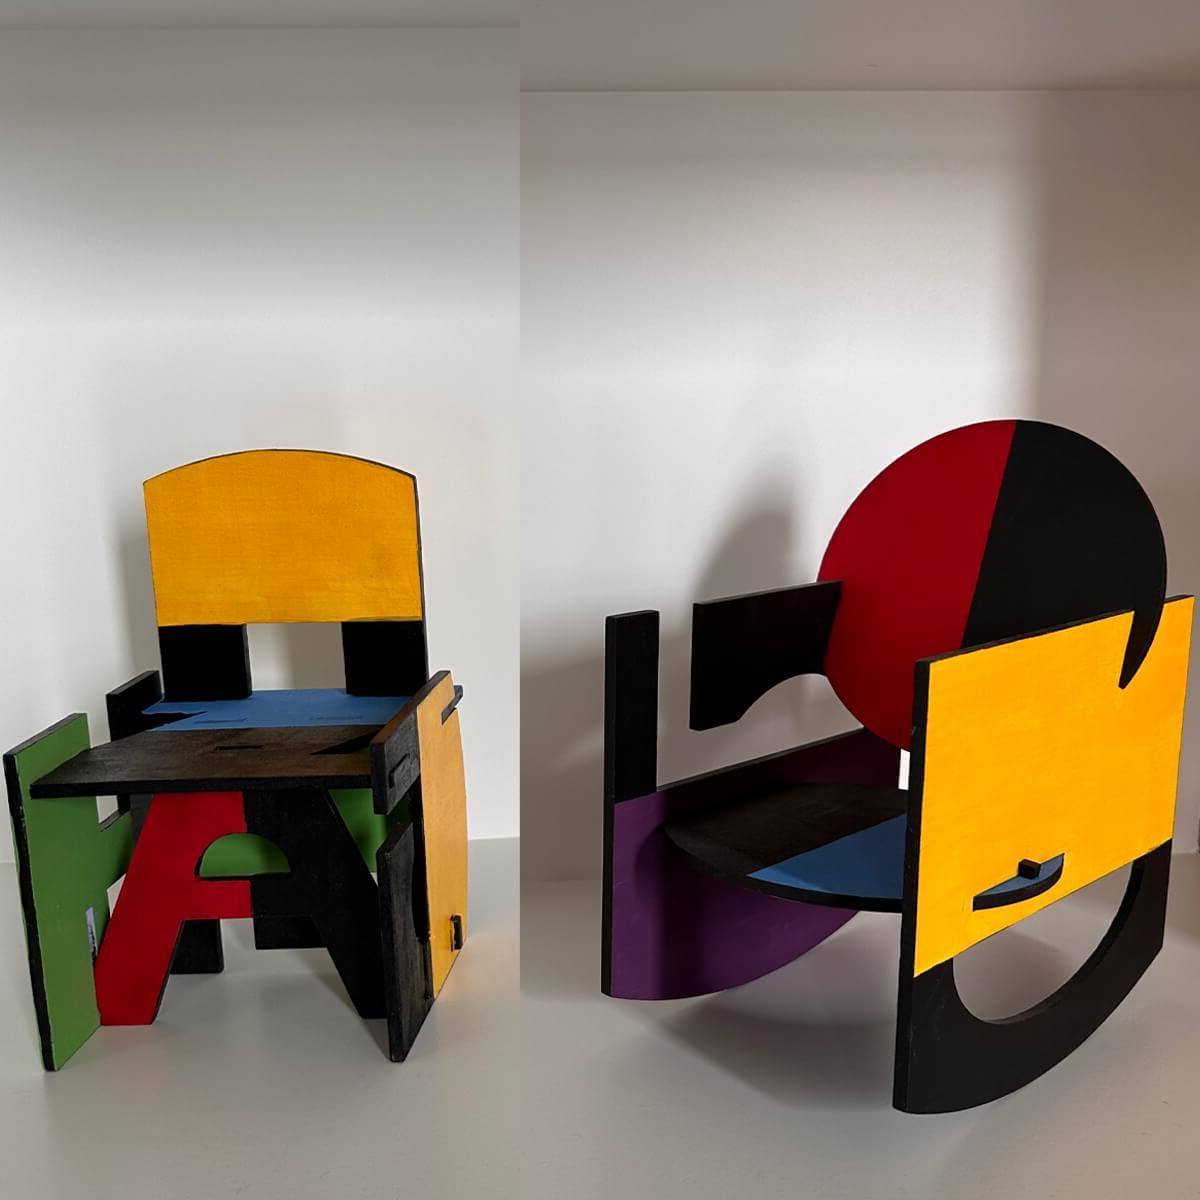 Two colorful student chair designs